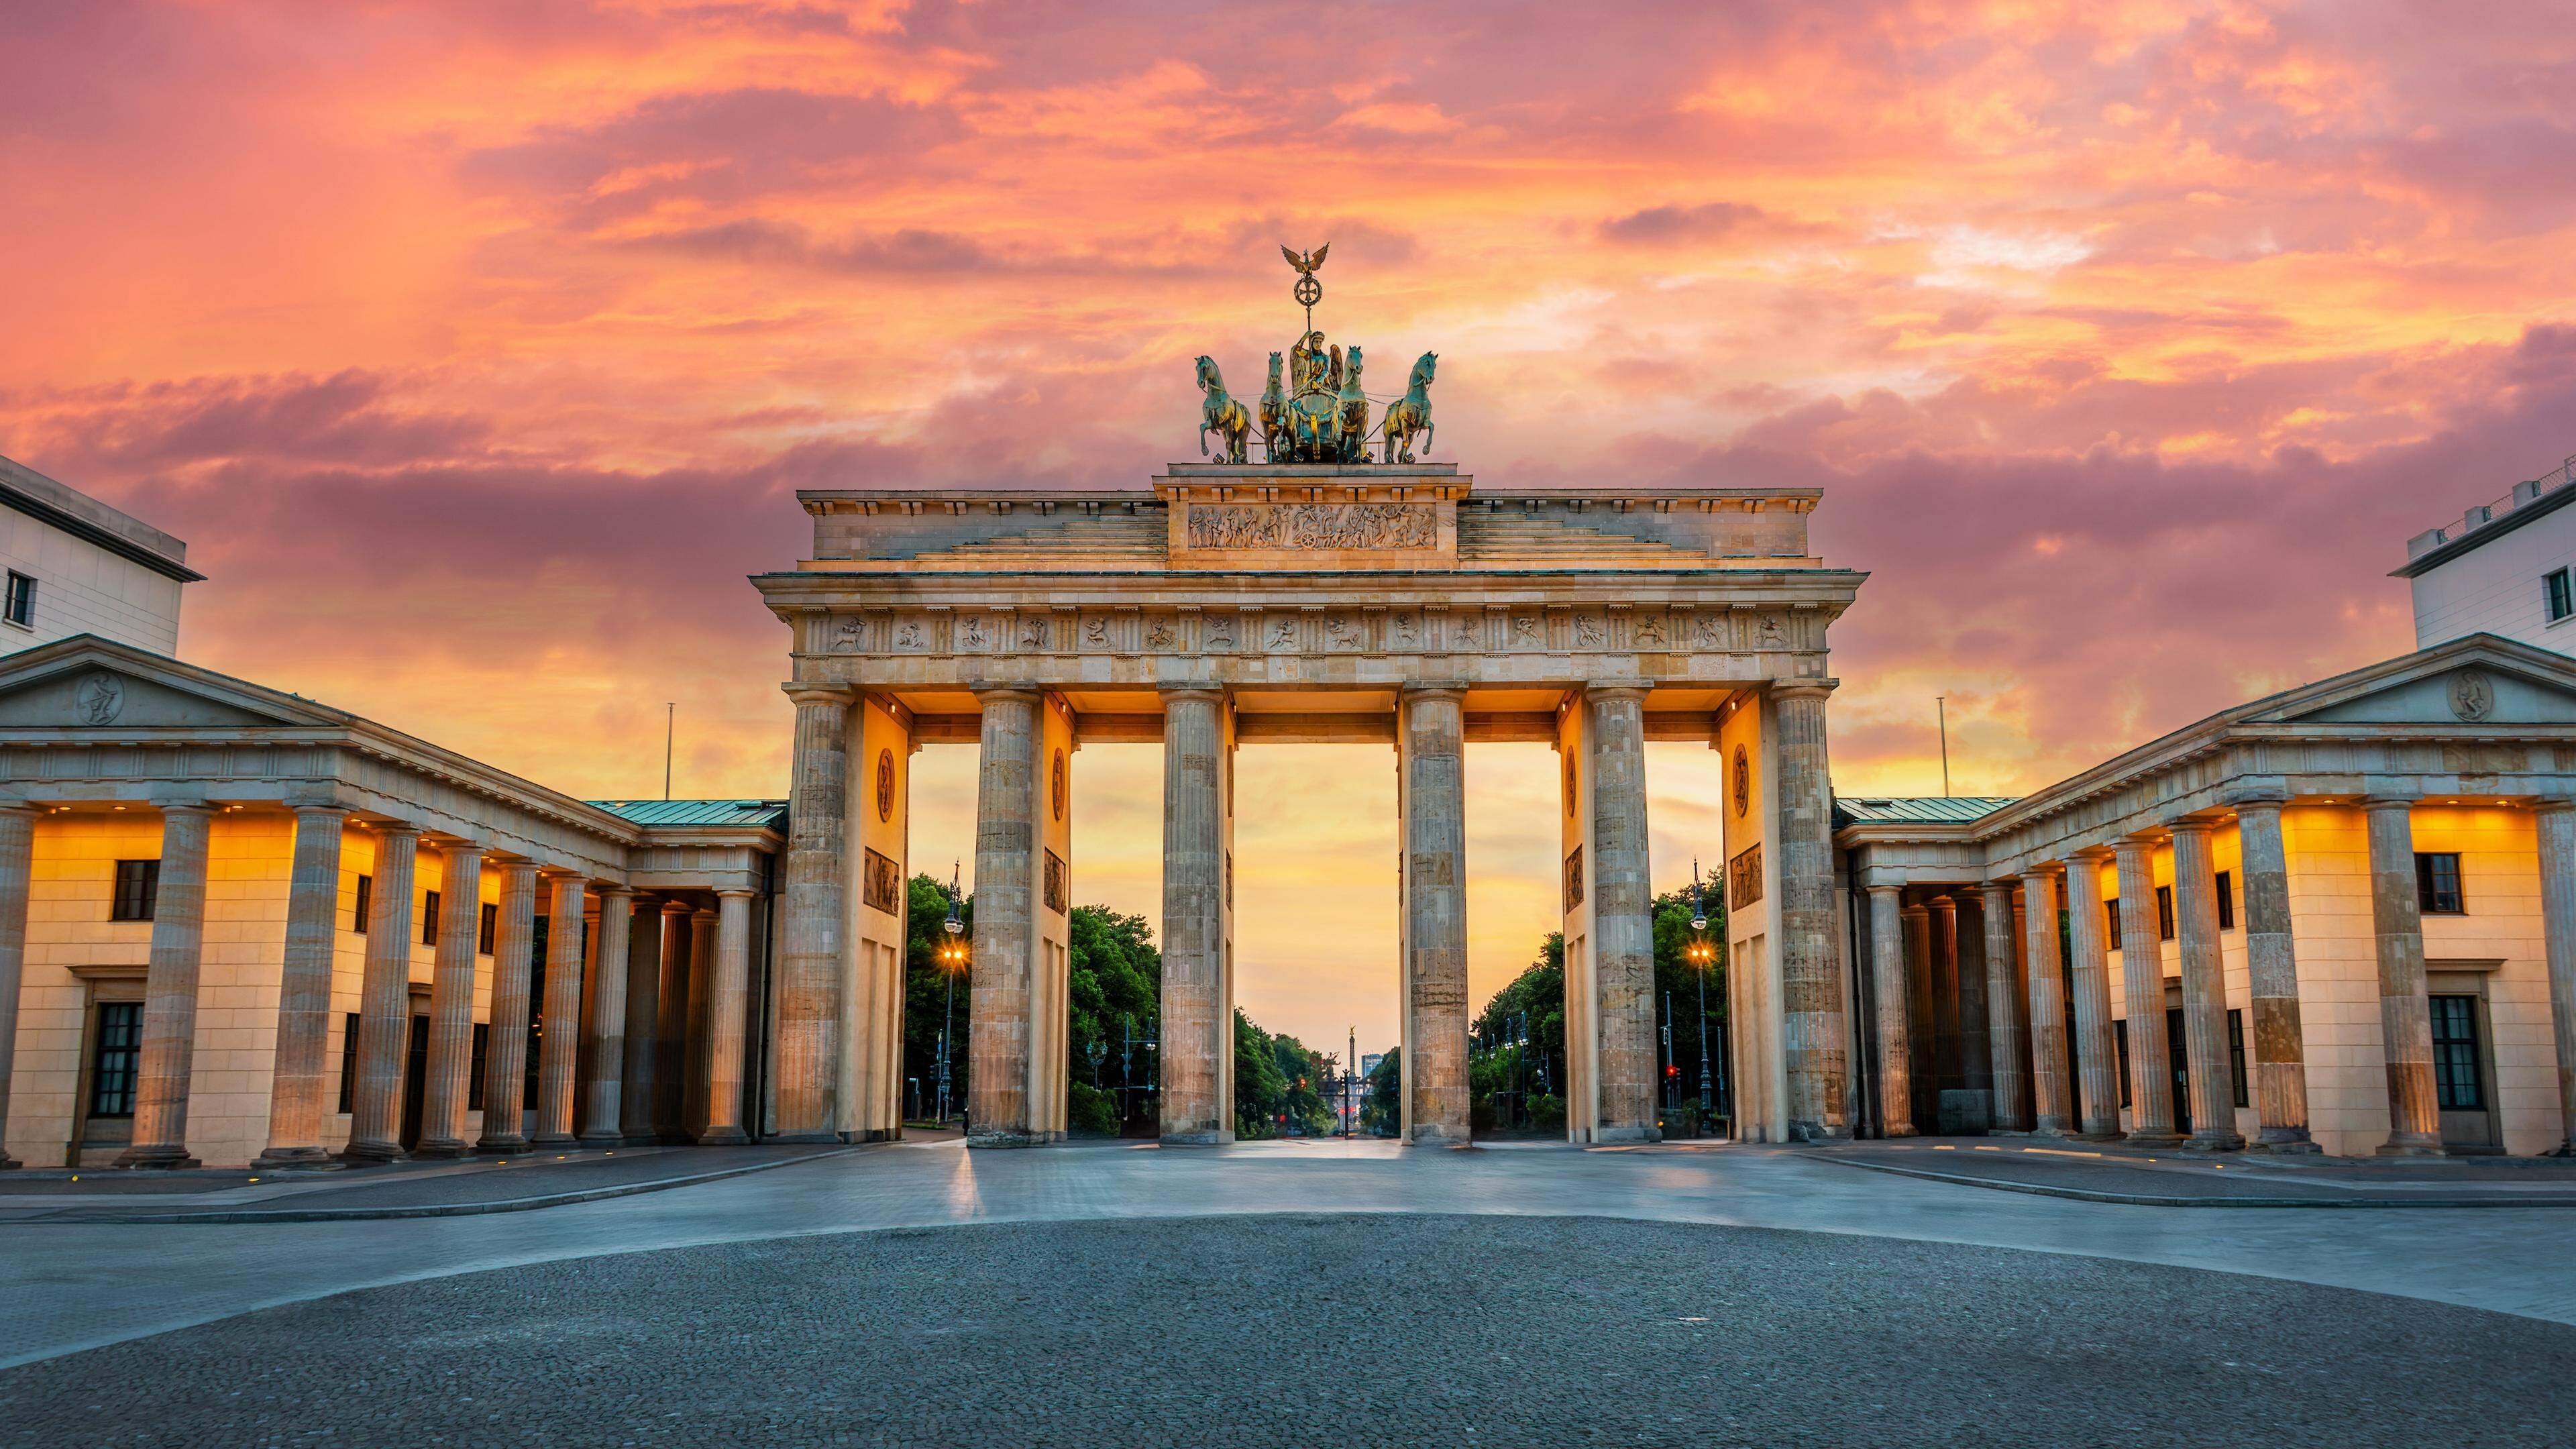 The iconic Brandenburg Gate is one of many things to explore for free in Berlin, with return flight prices from just over €110